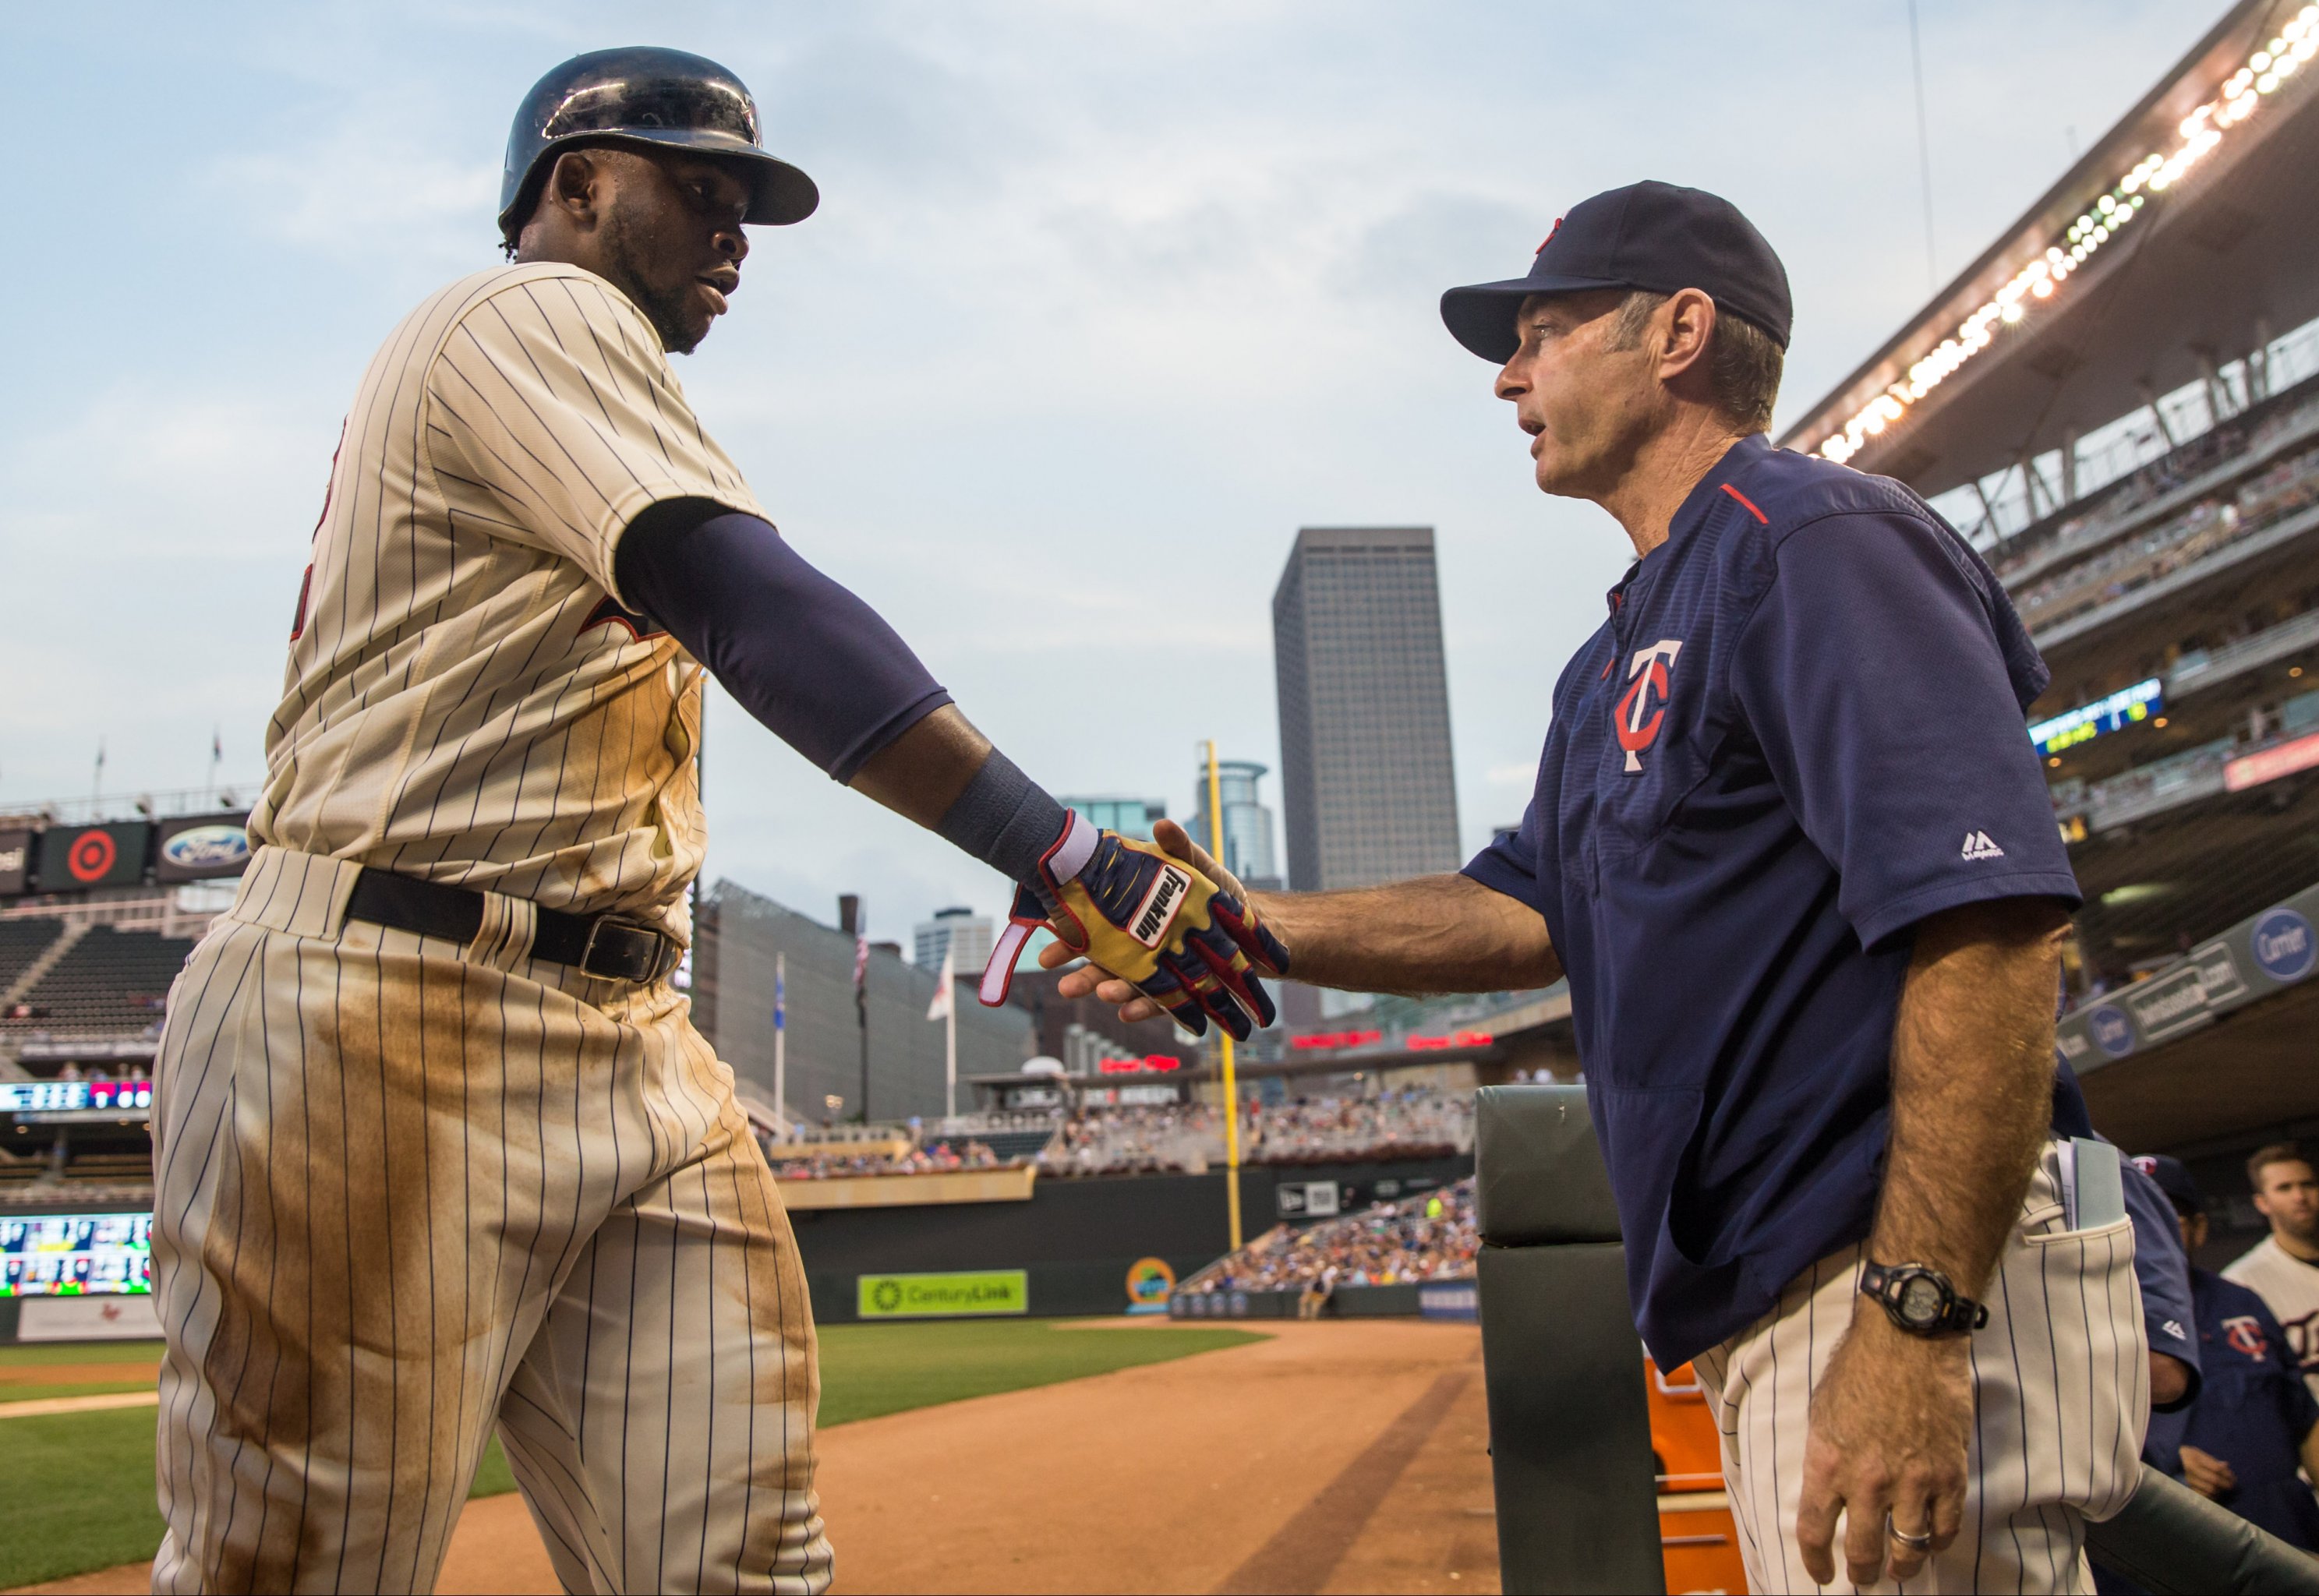 Miguel Sano Overcame Death of Child, Suicidal Thoughts to Reach